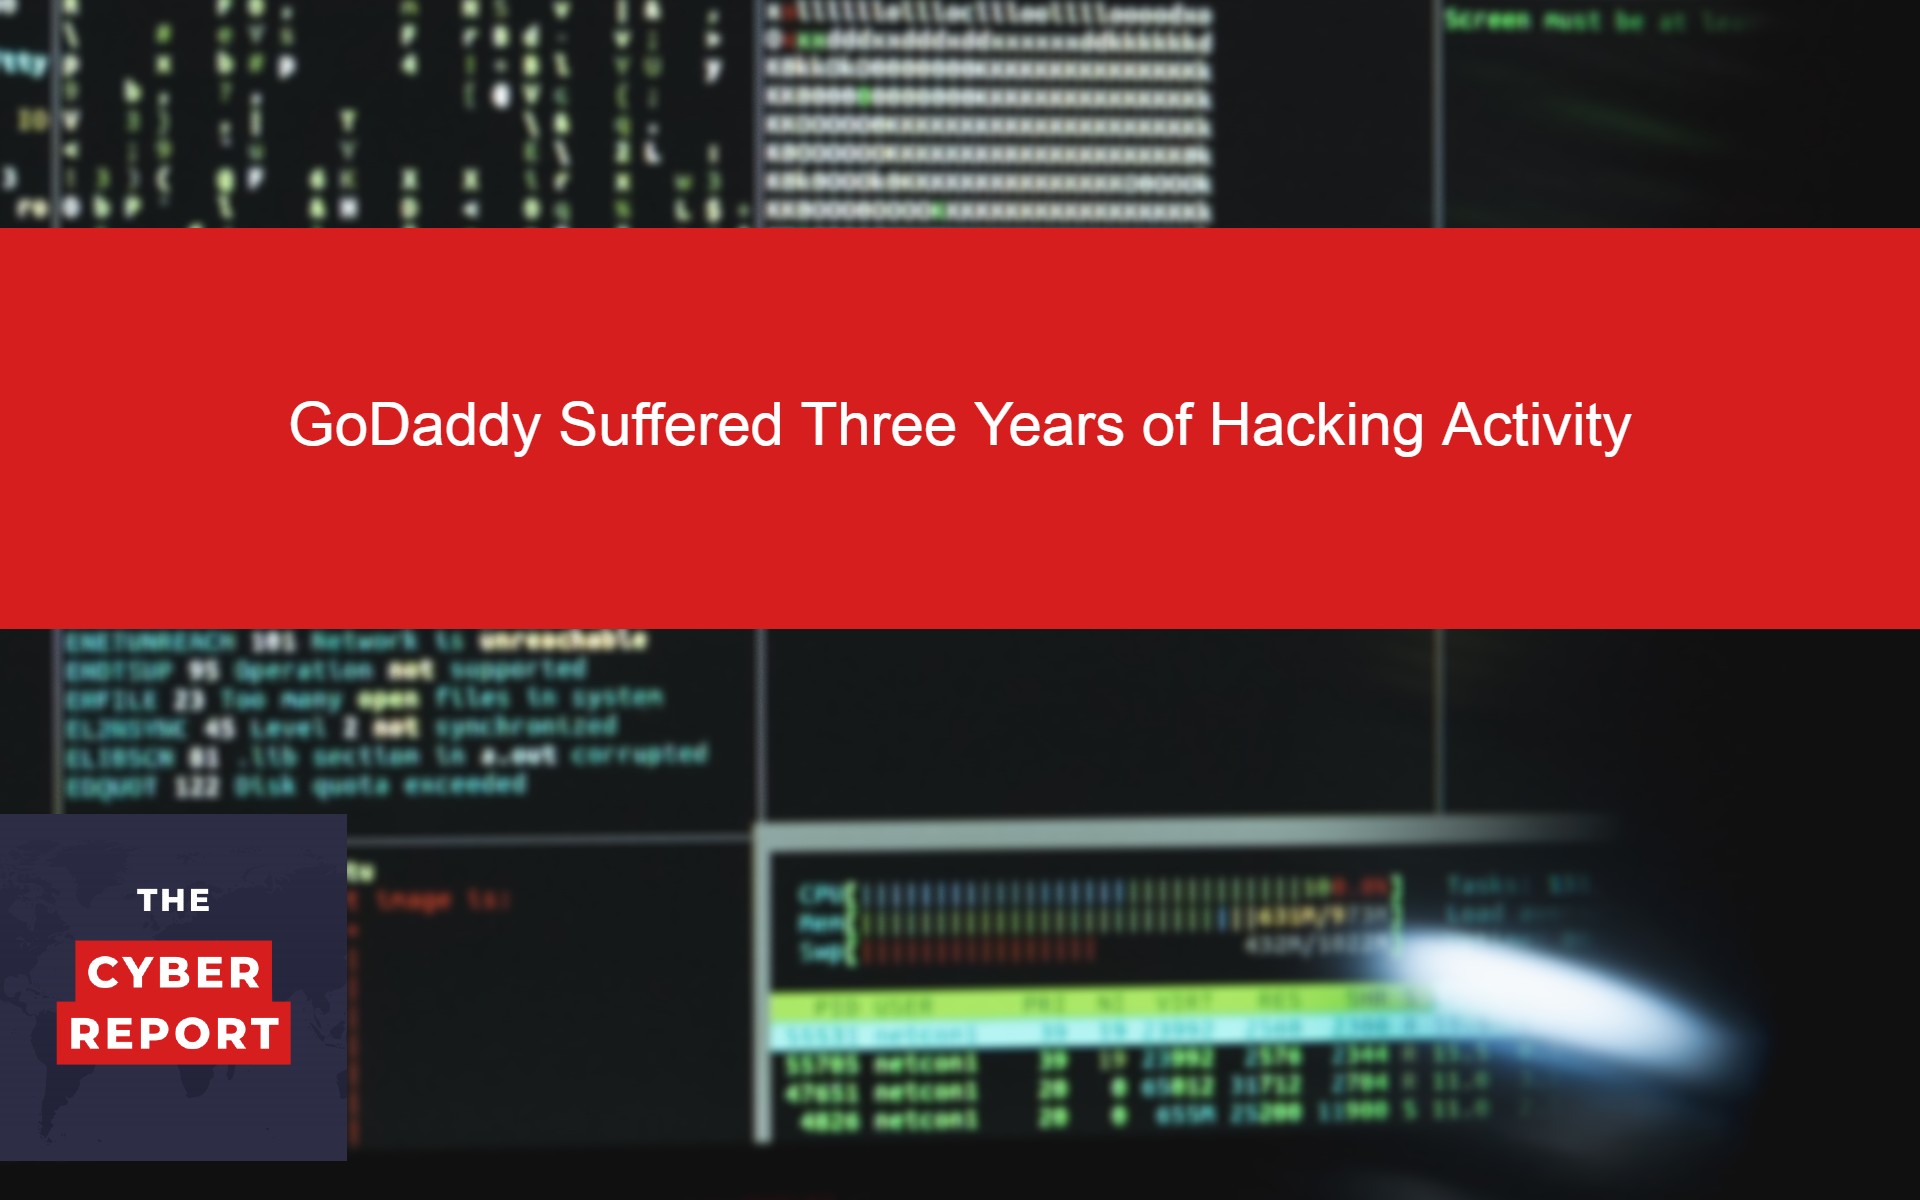 GoDaddy Suffered Three Years of Hacking Activity